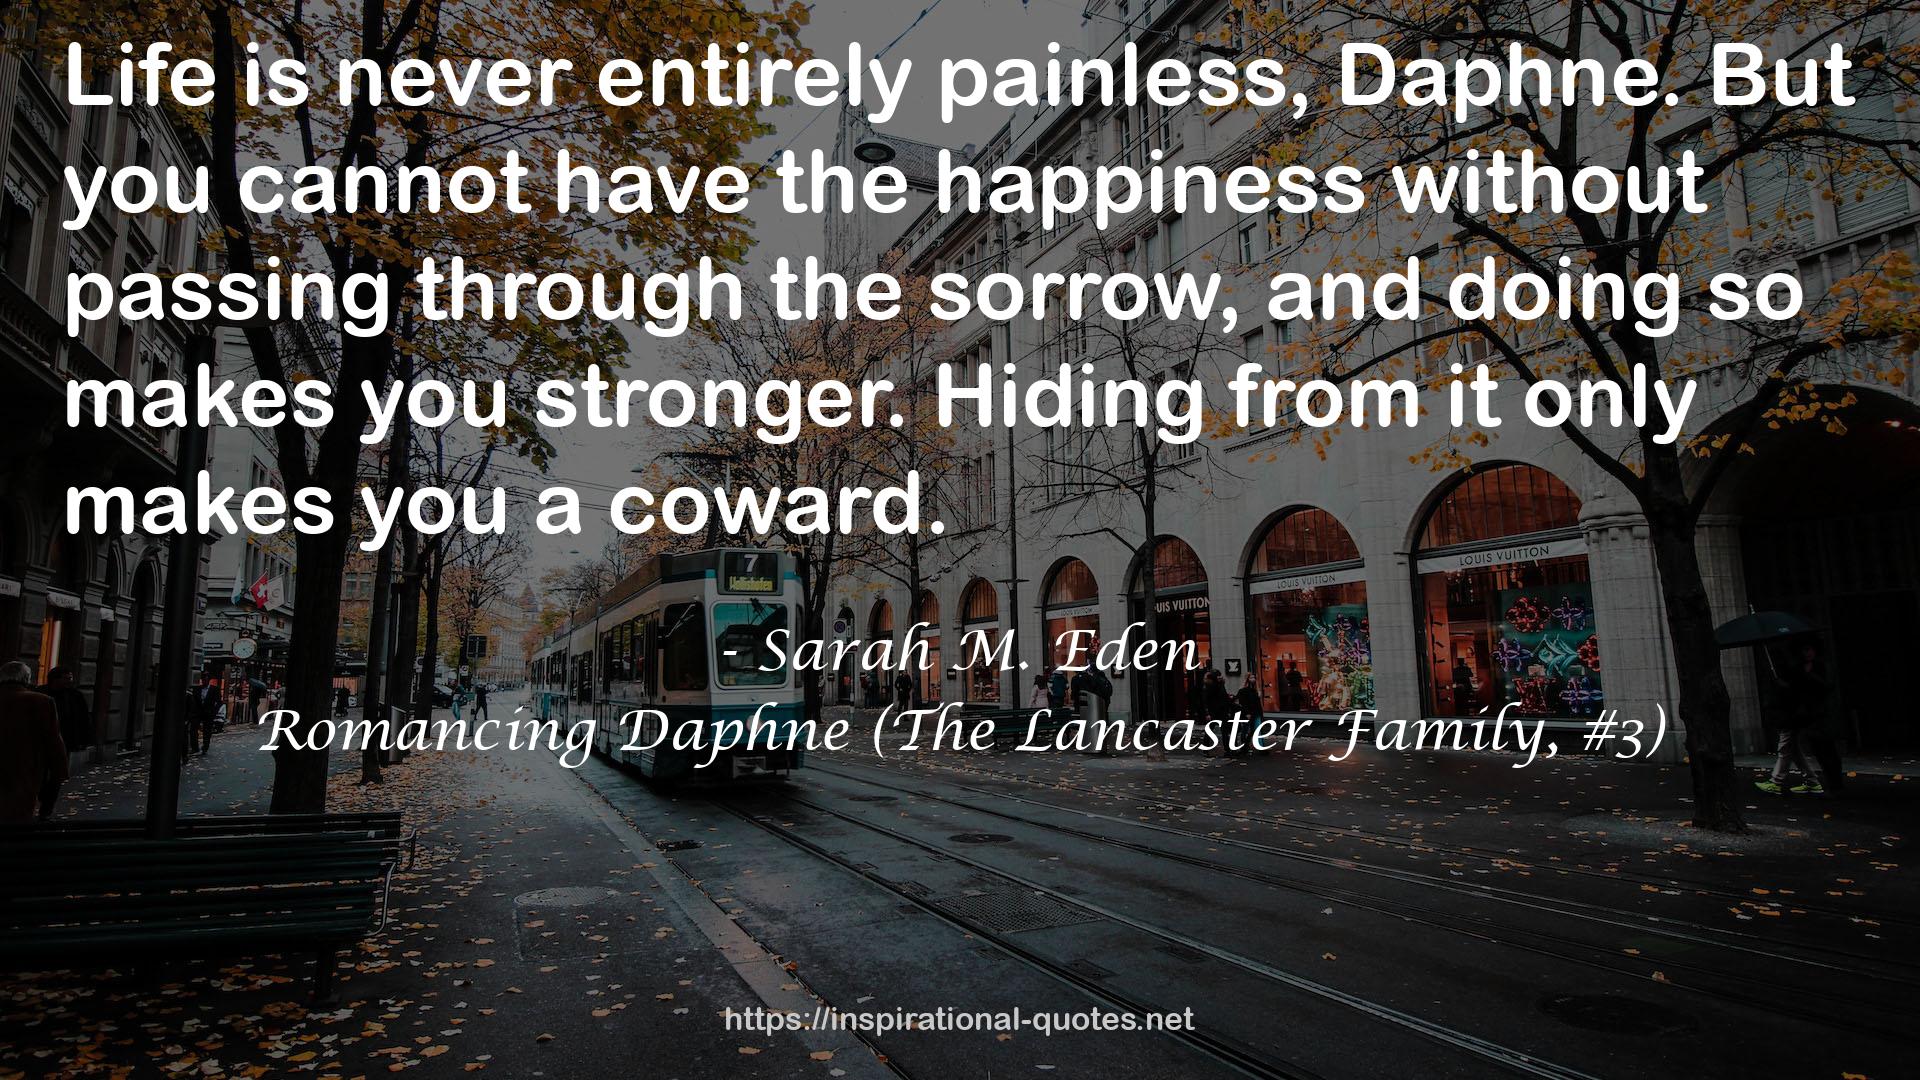 Romancing Daphne (The Lancaster Family, #3) QUOTES